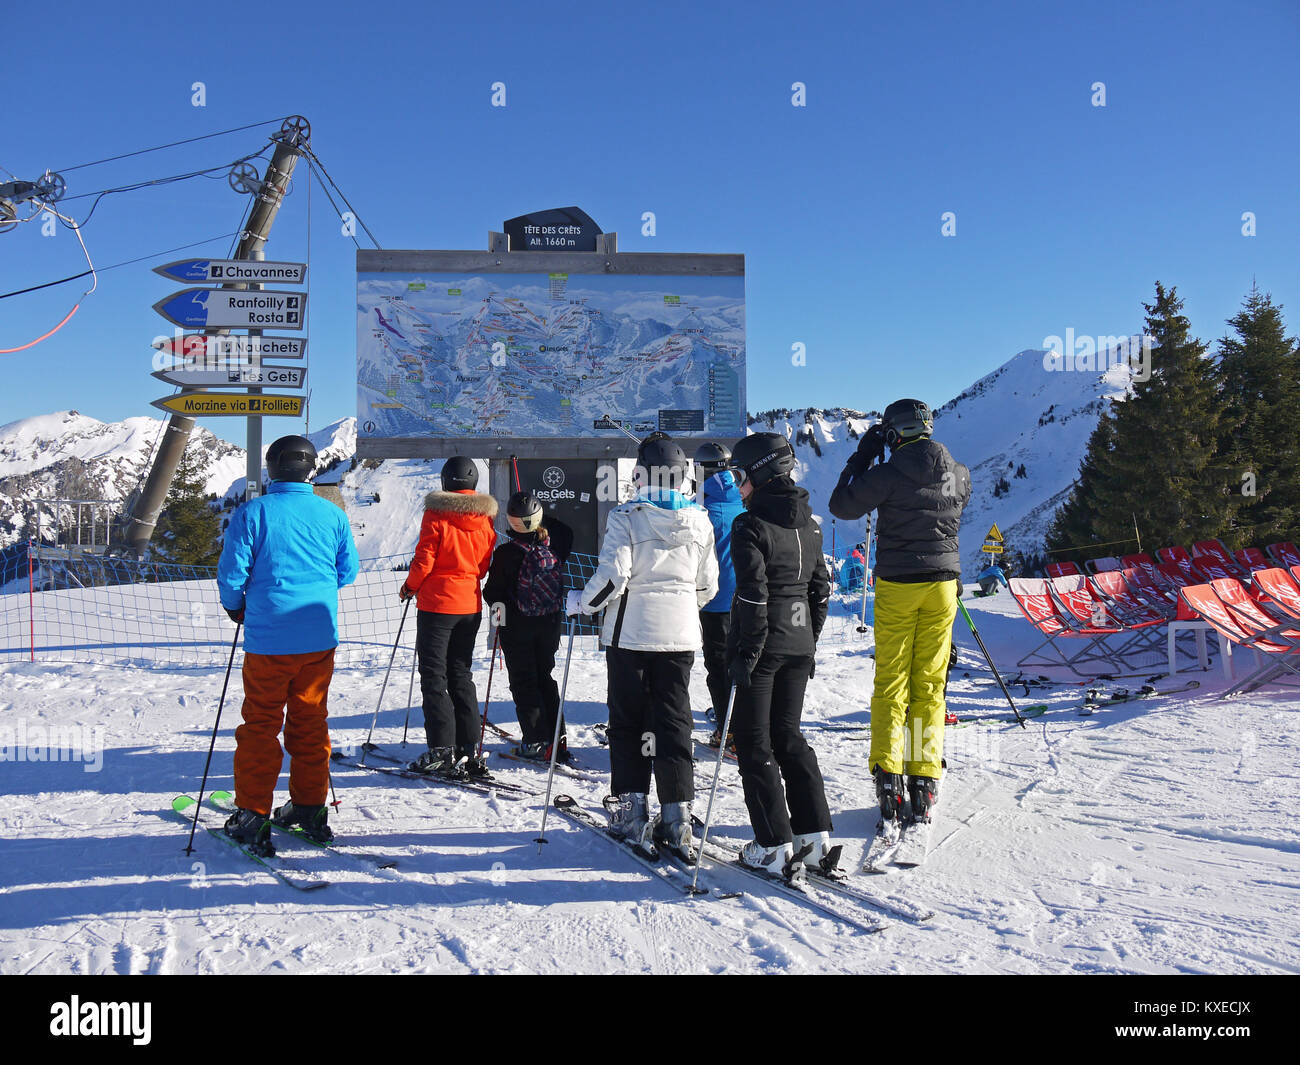 Top of Chavannes ski lifts, skiers llooking at the piste map on the board Stock Photo